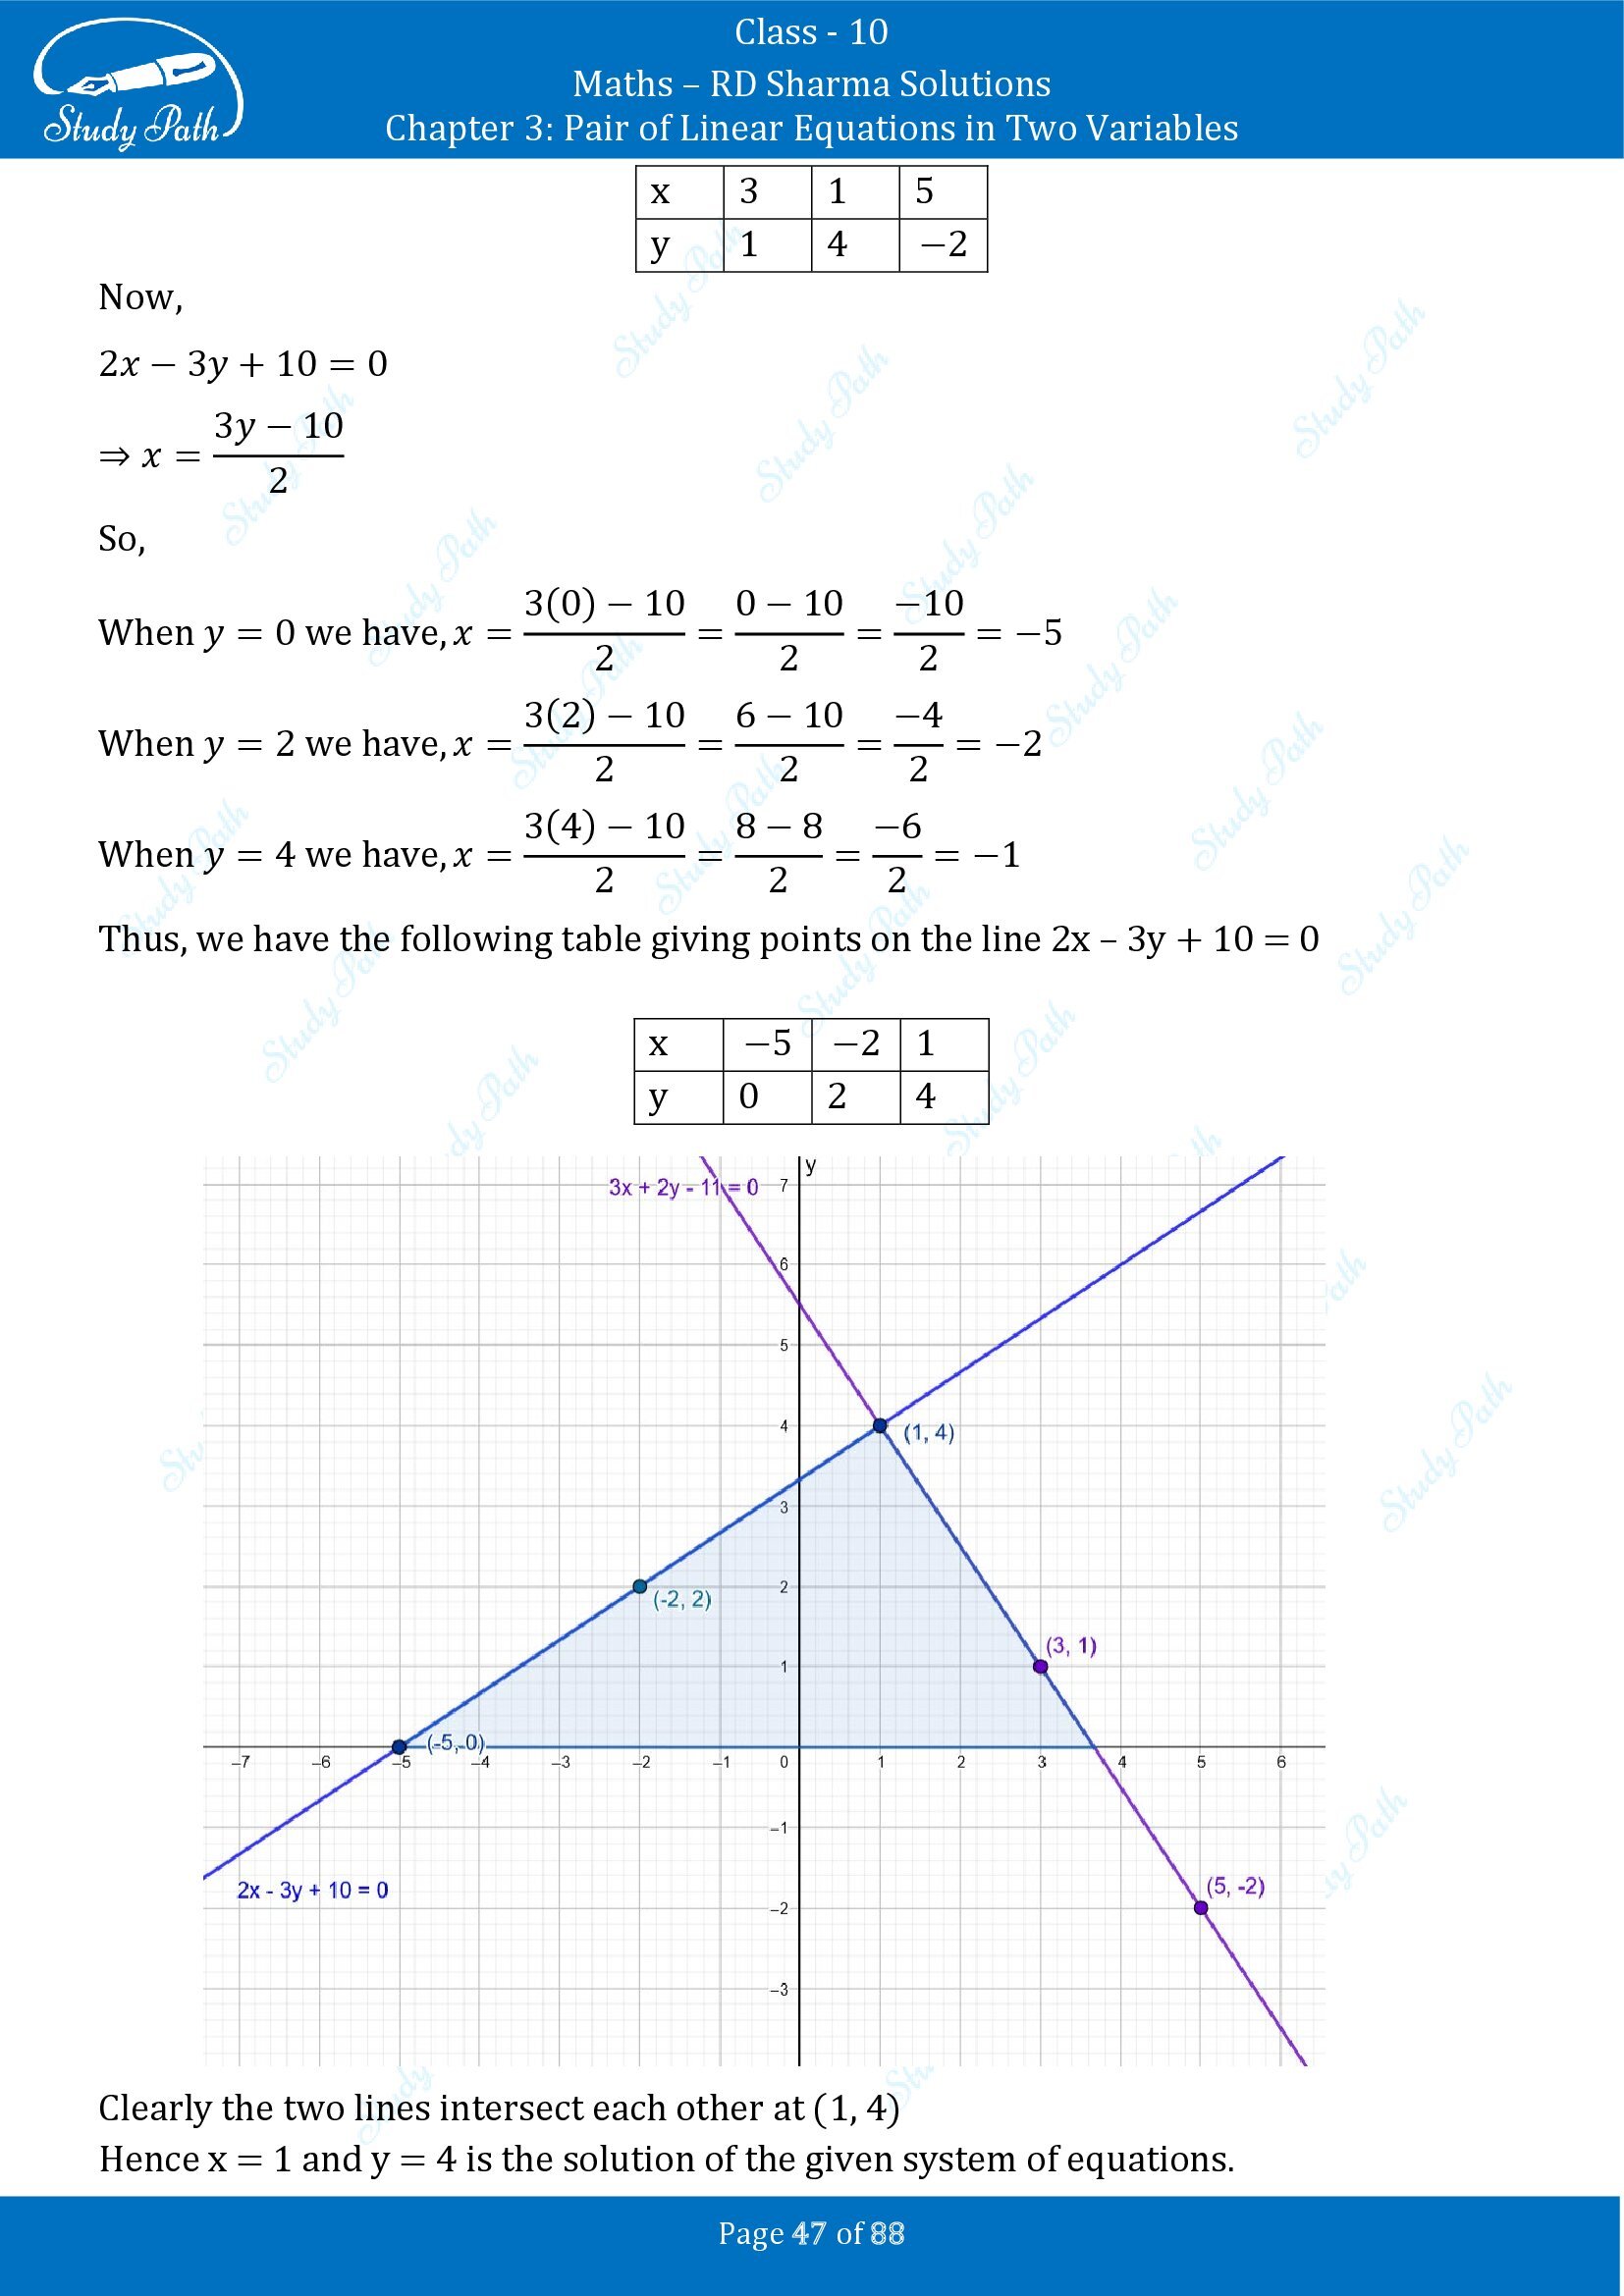 RD Sharma Solutions Class 10 Chapter 3 Pair of Linear Equations in Two Variables Exercise 3.2 00047